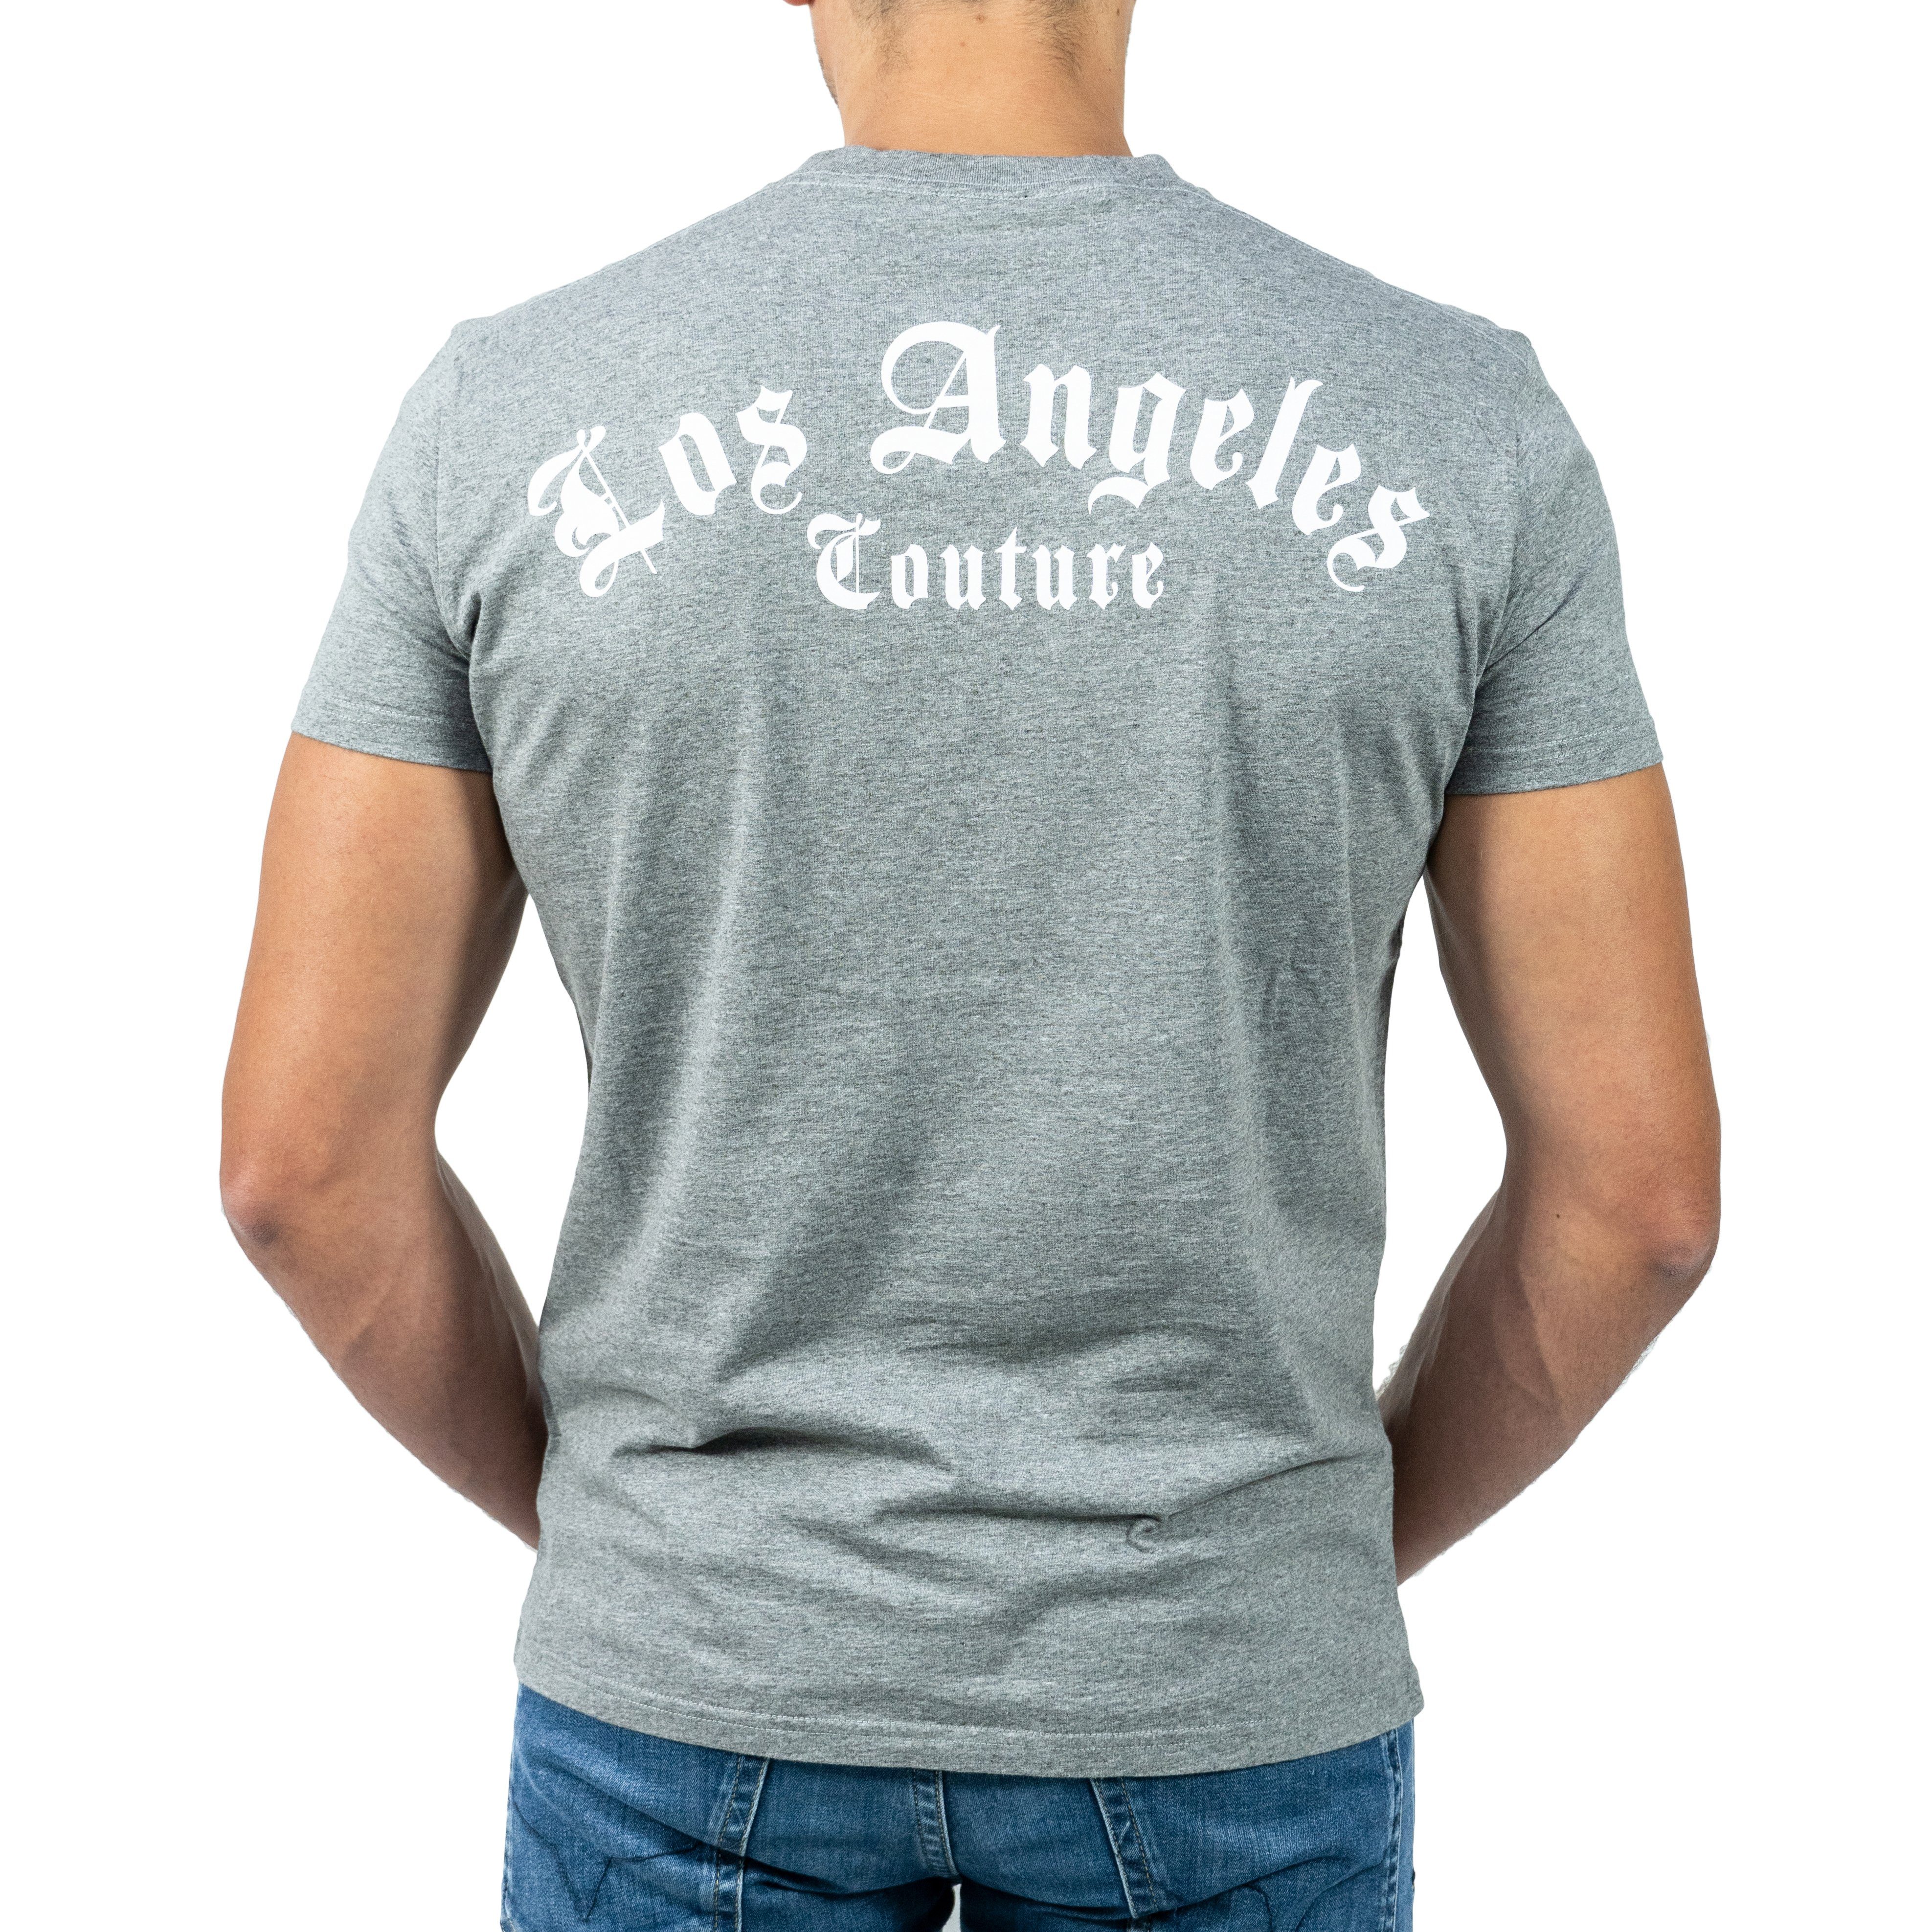 Chiccheria Brand T-Shirt Los in Angeles Angeles, Grau Los Couture Designed